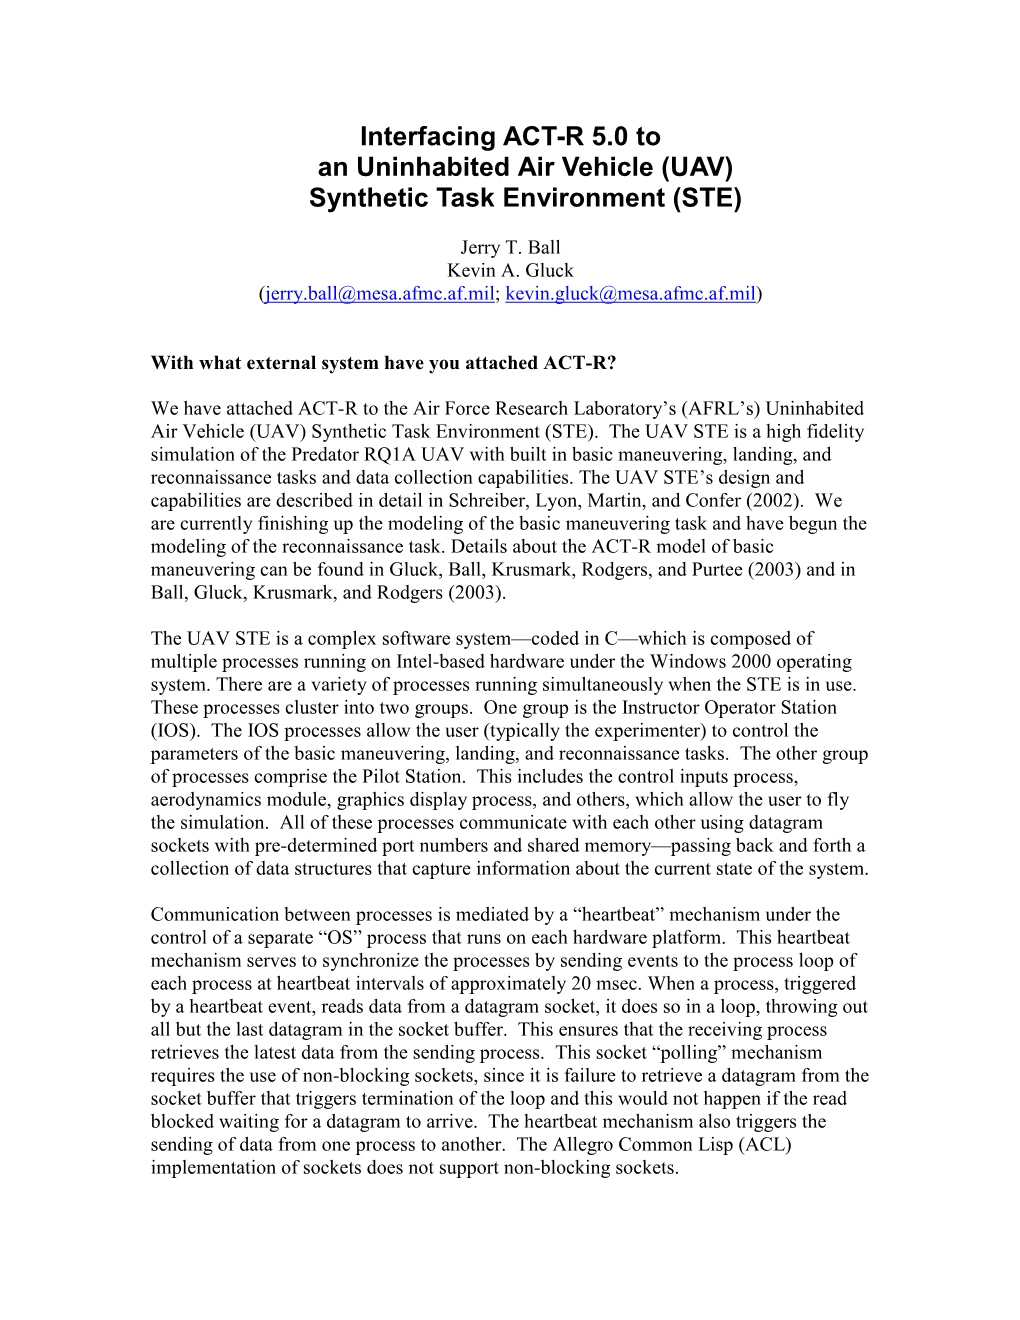 Interfacing ACT-R 5.0 to an Uninhabited Air Vehicle (UAV) Synthetic Task Environment (STE)